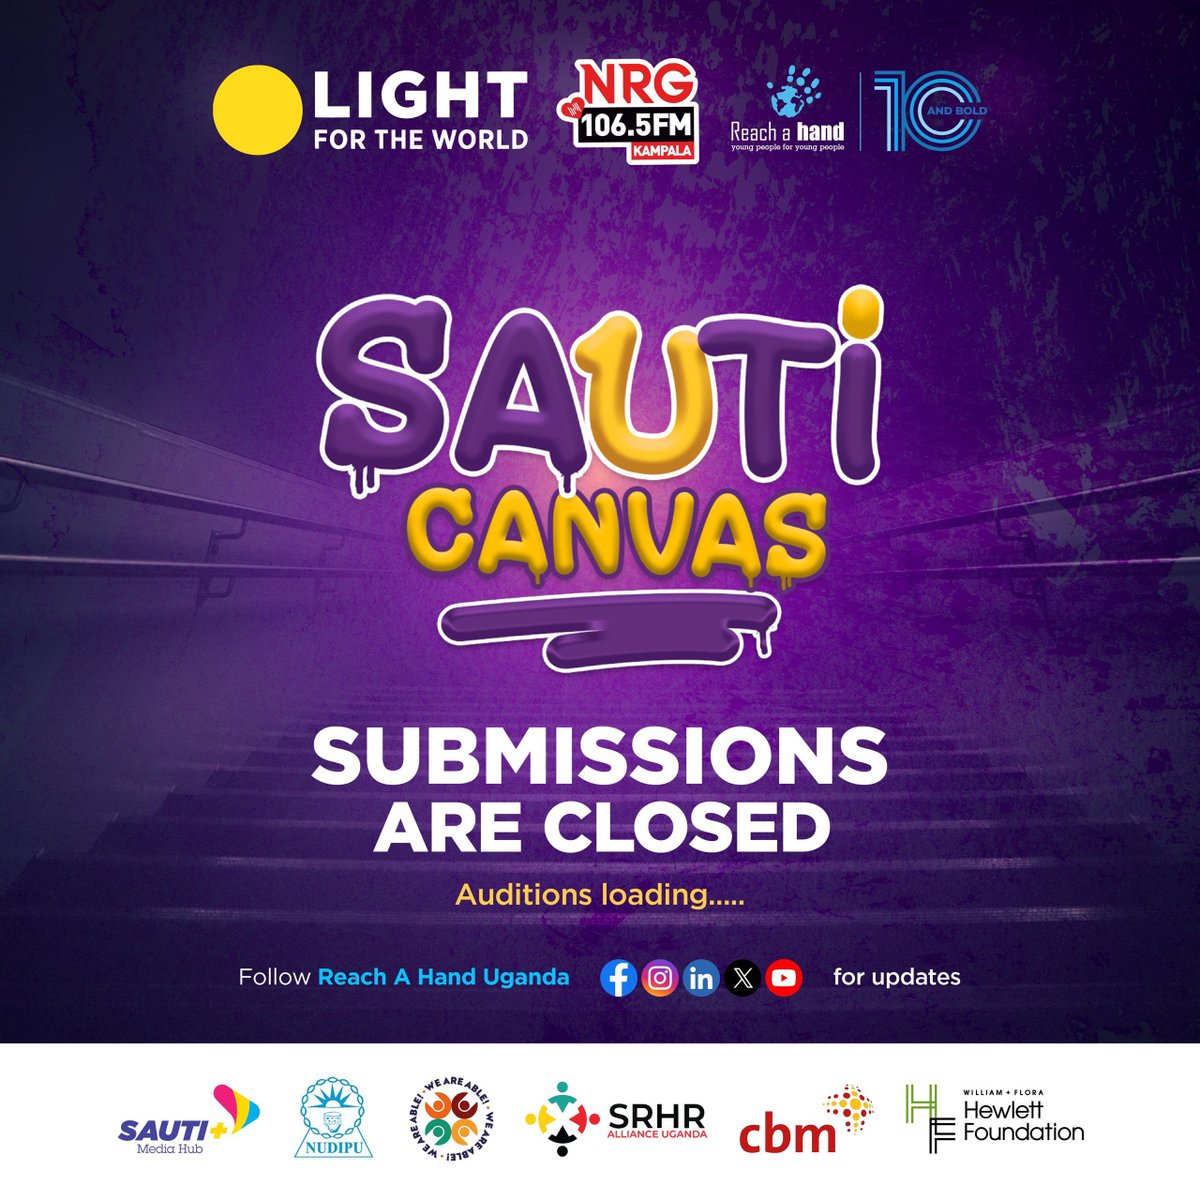 📢📢📢📢📢 Submissions for the second season of the #SautiCanvas are officially closed. Now, the anticipation builds as we eagerly await the auditions for an opportunity to see what each of our talented contestants bring to the table. Stay tuned... #WeAreAble